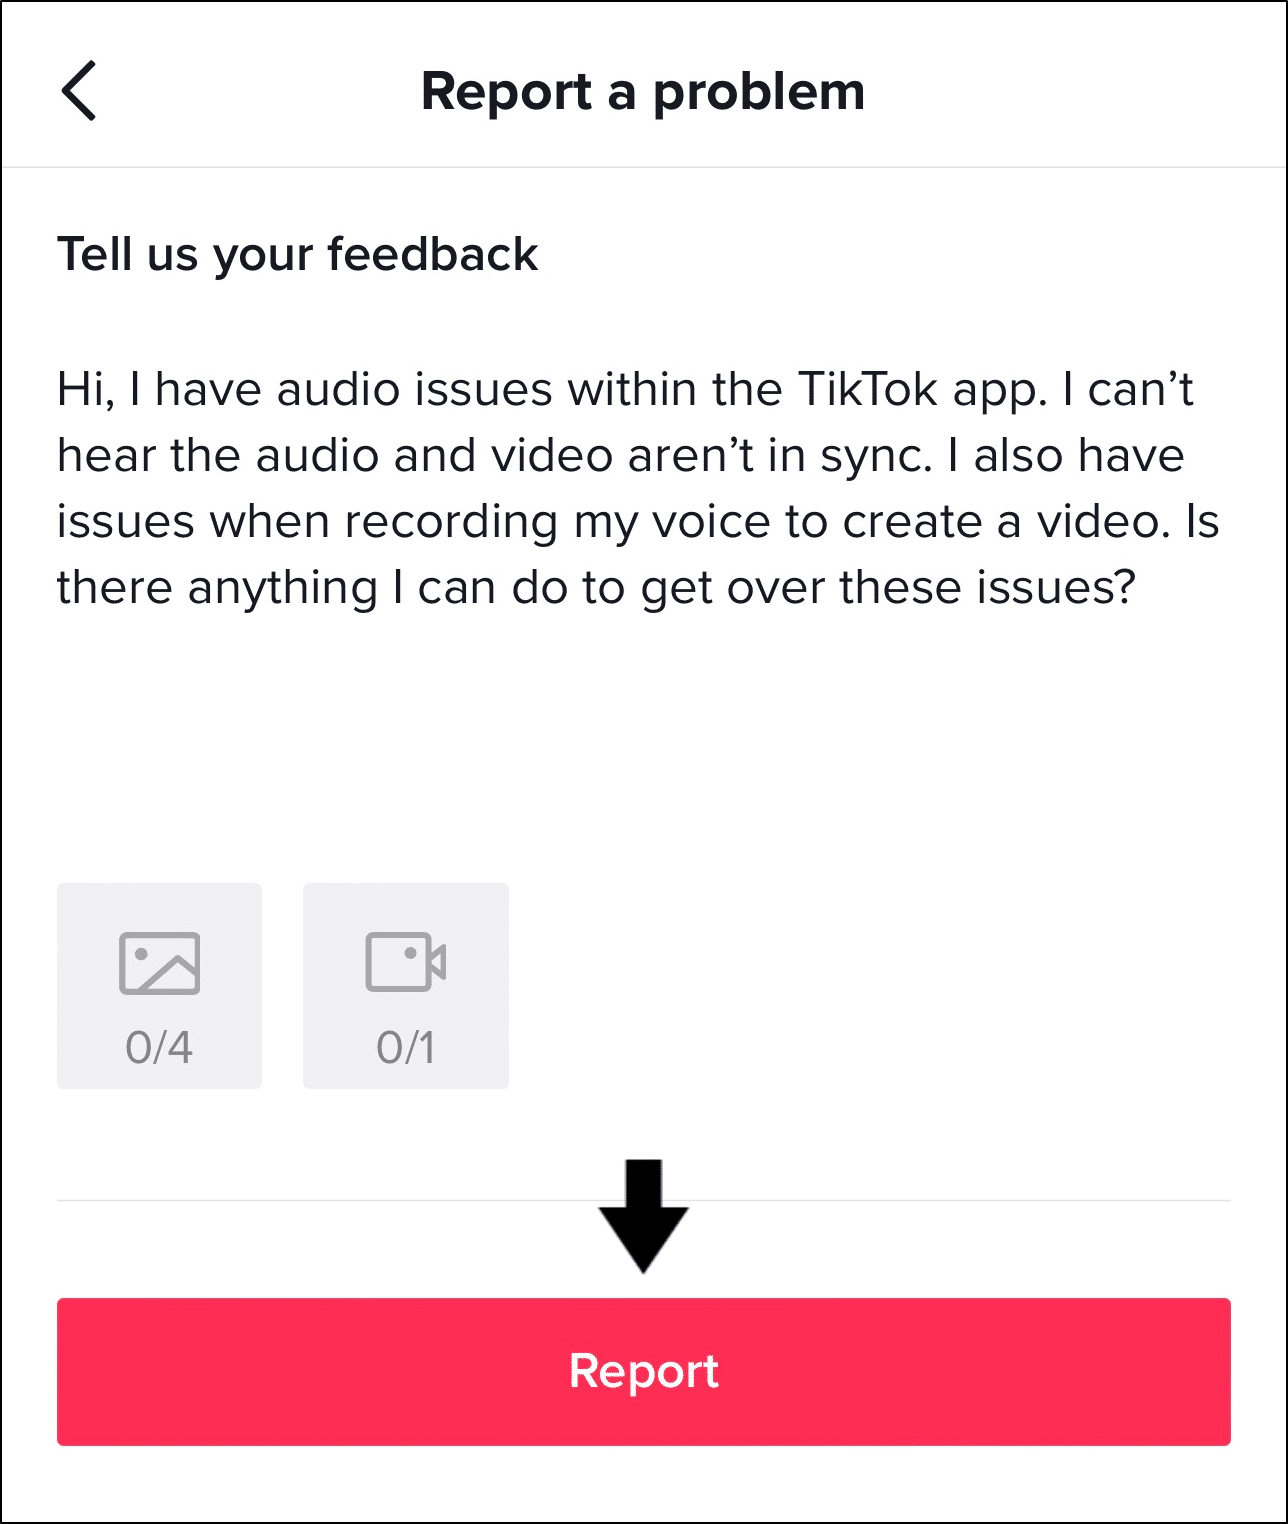 submit a feedback form to tiktok support with details of your issues to fix TikTok no sound, audio sync, volume, or microphone not working